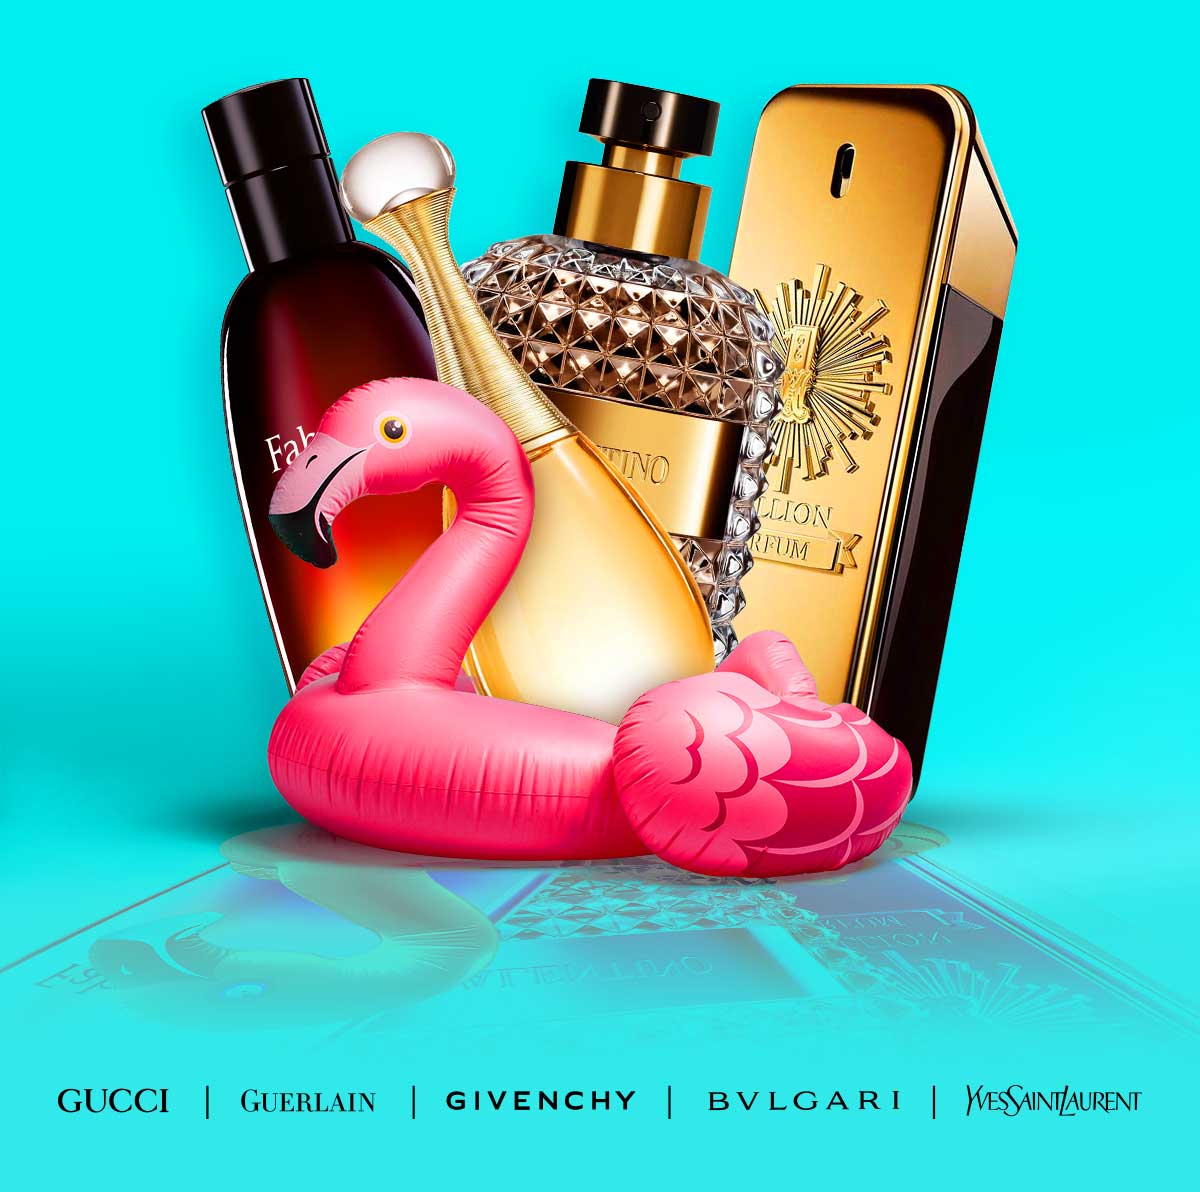 Popular perfume and cologne bottles sit in a pool float to advertise summer savings